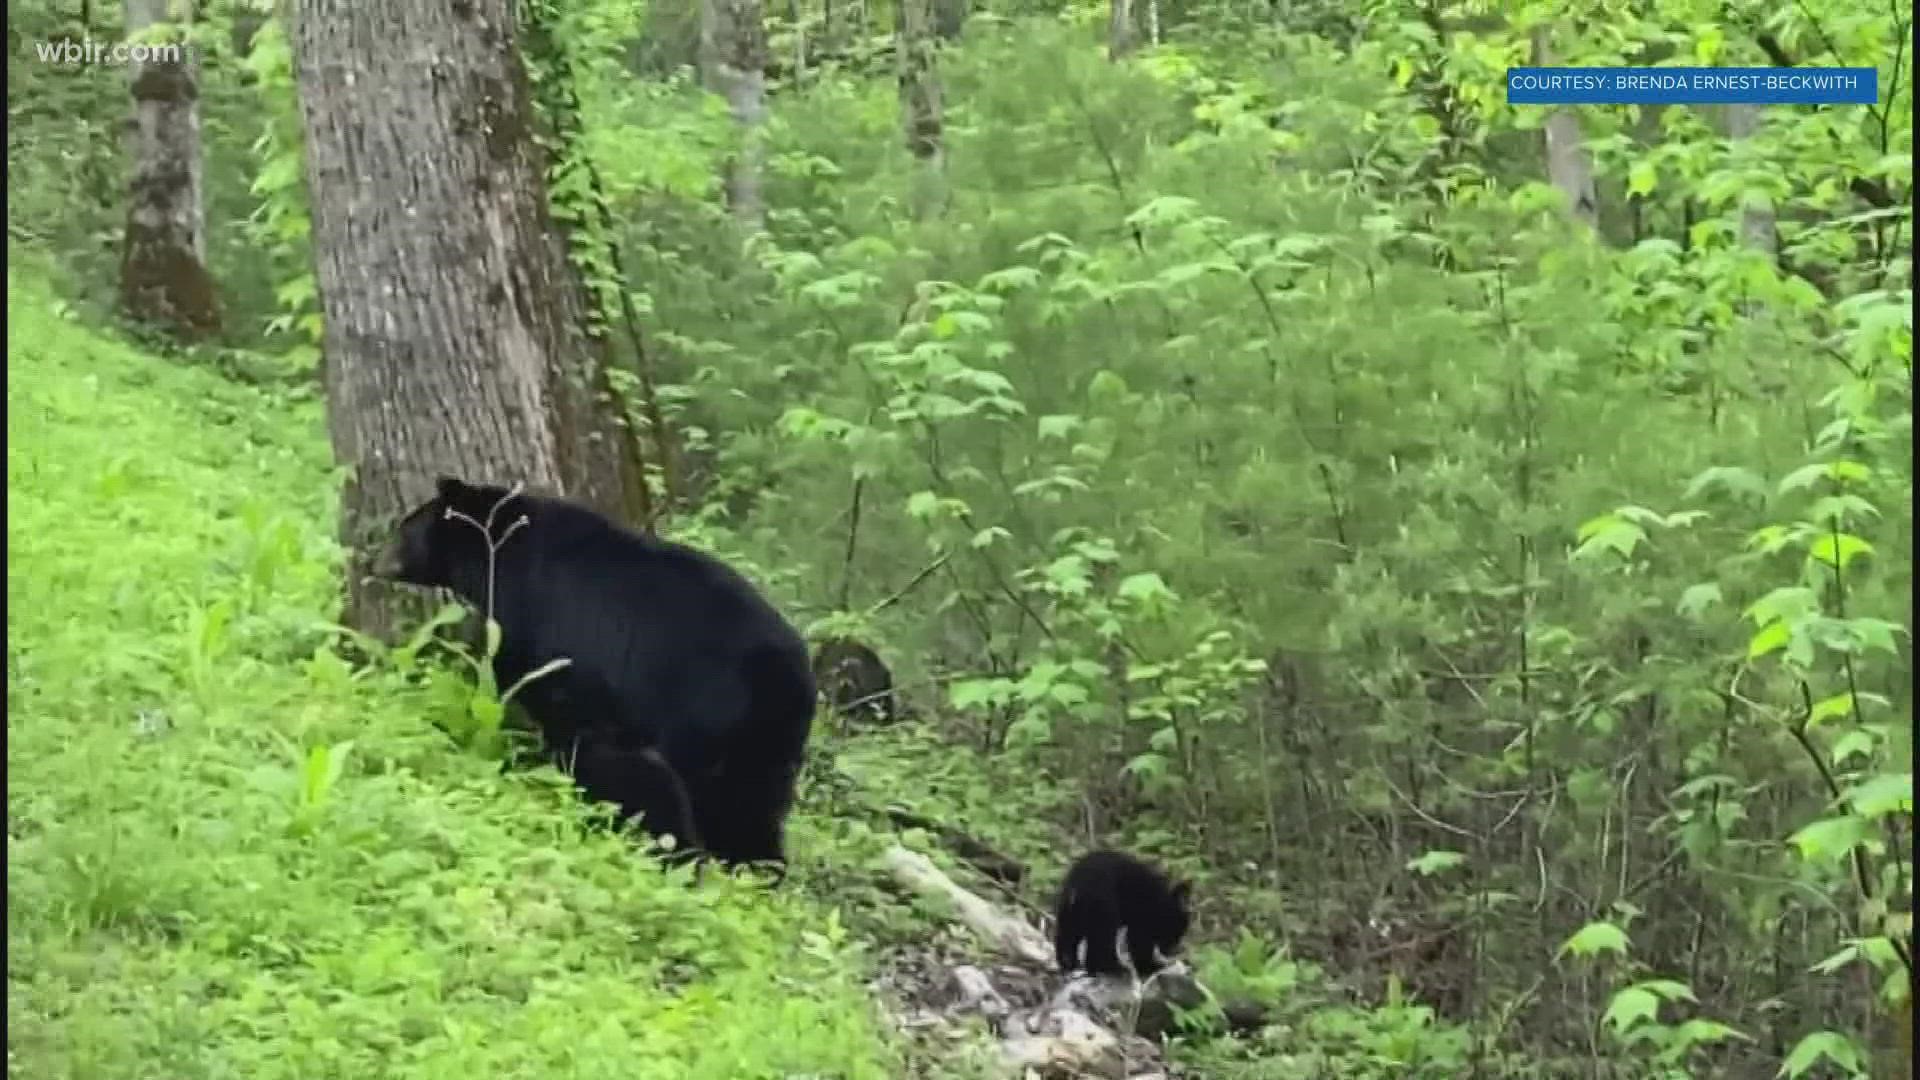 Bears are more active this time of year as they search for food.